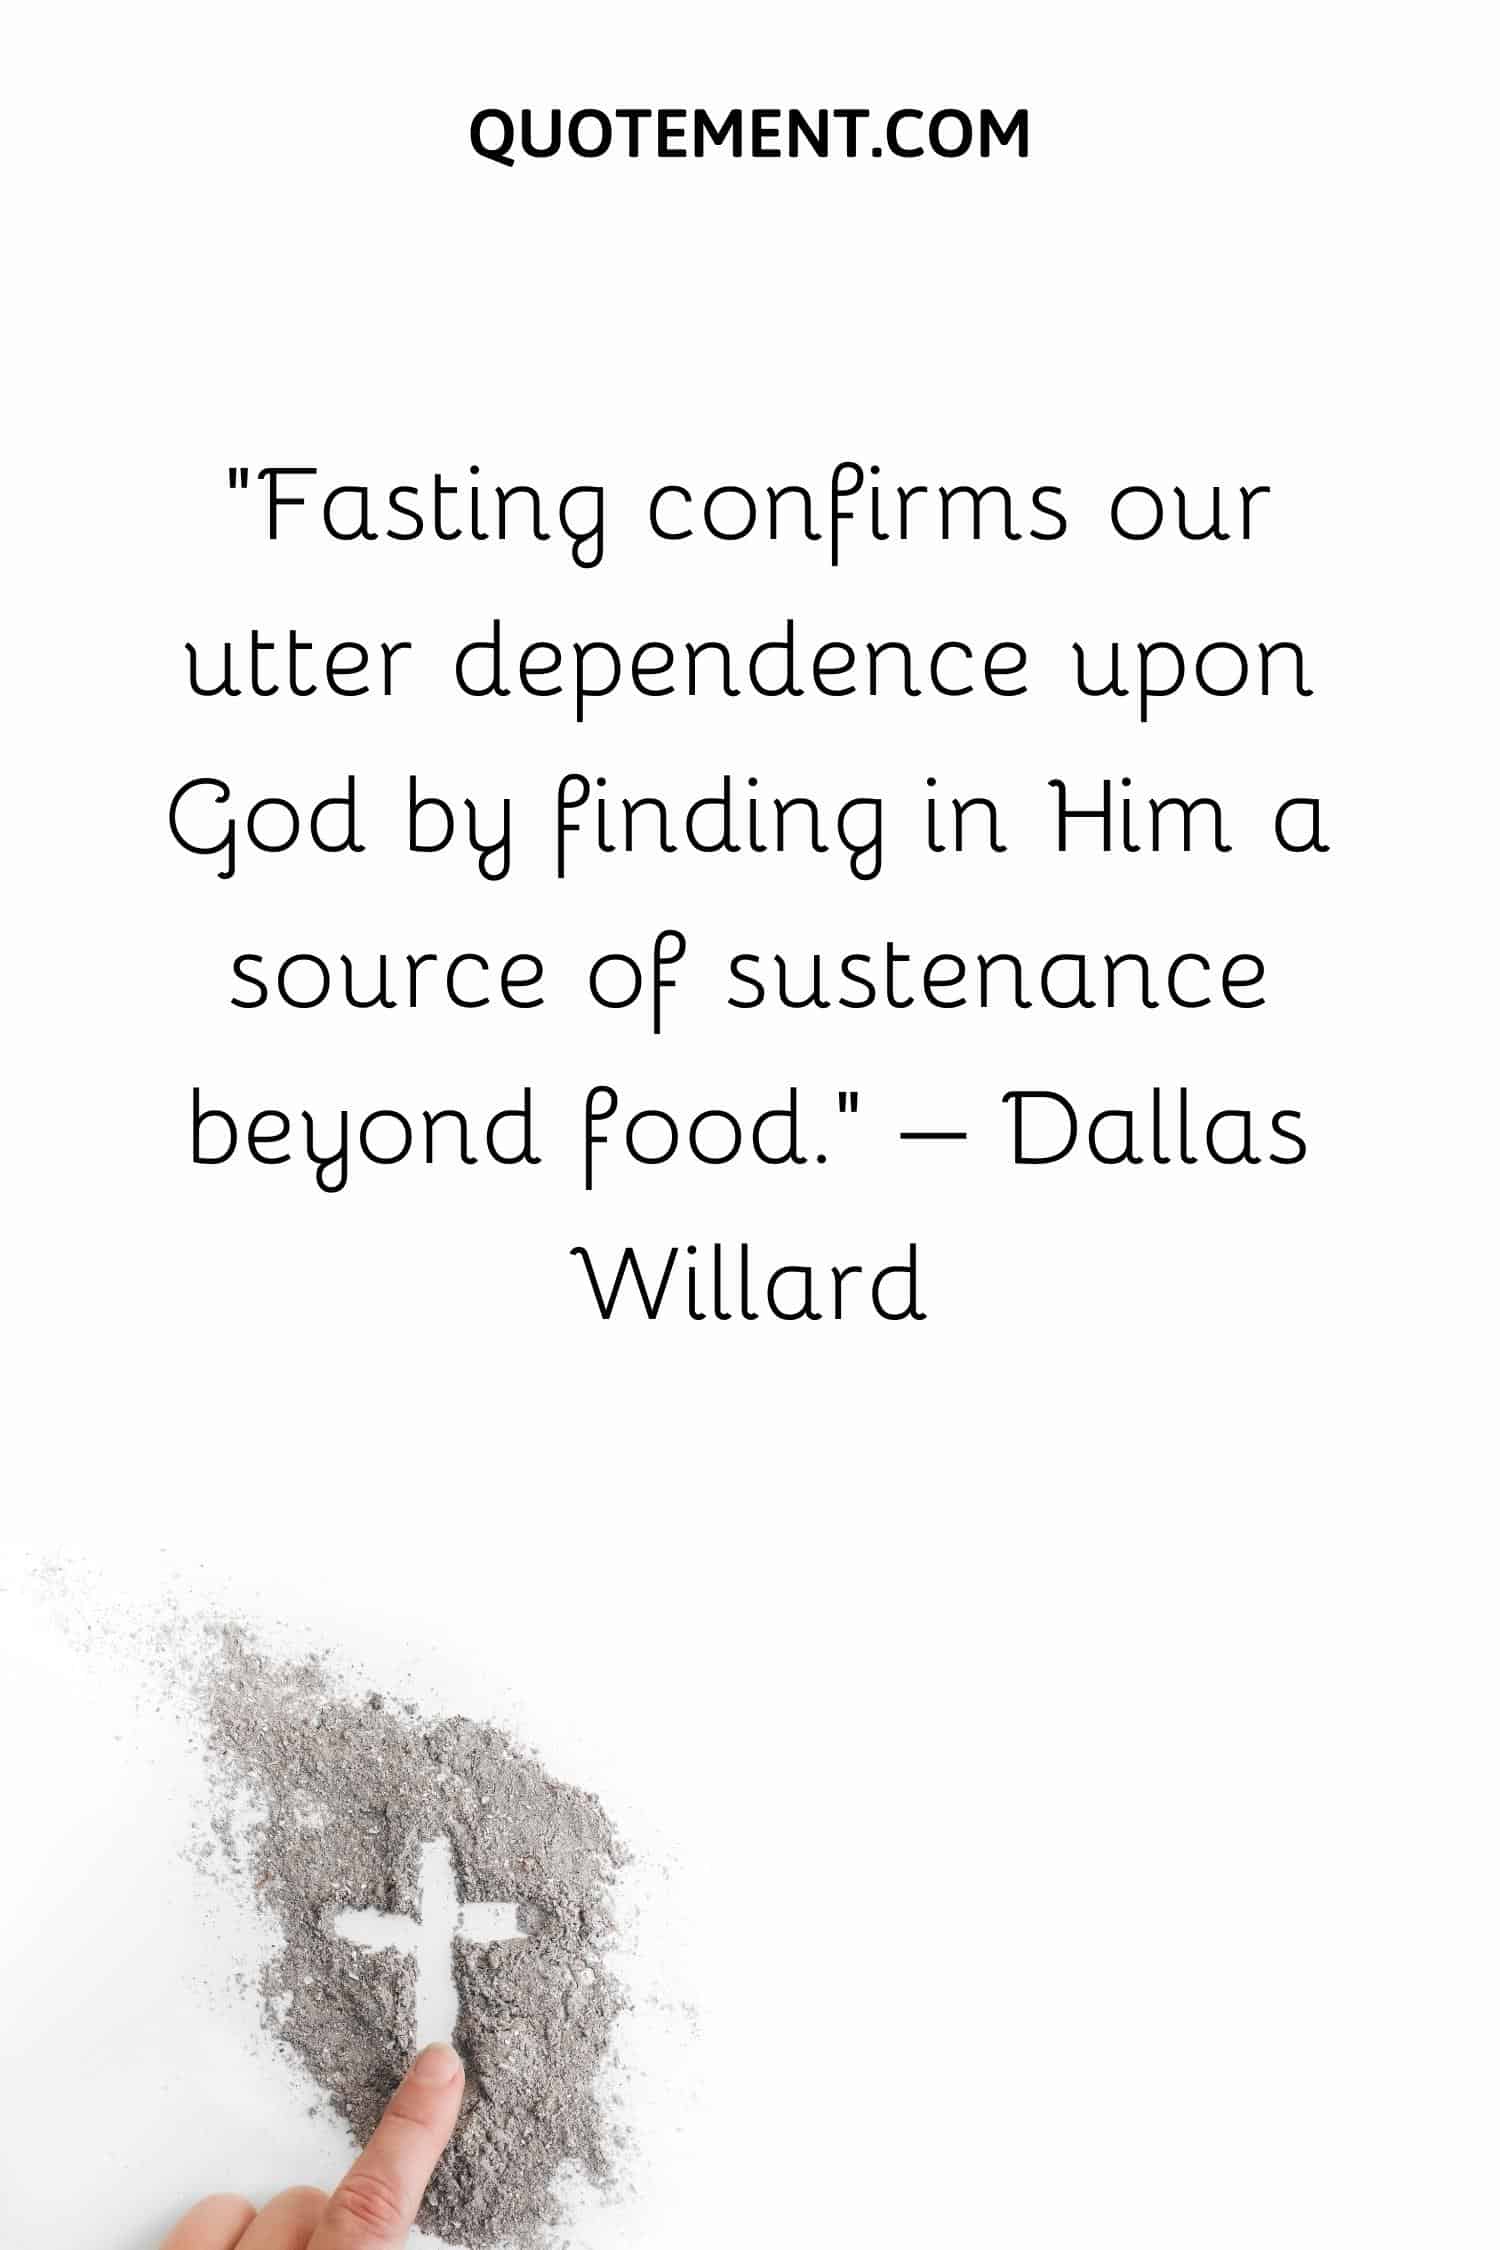 Fasting confirms our utter dependence upon God by finding in Him a source of sustenance beyond food